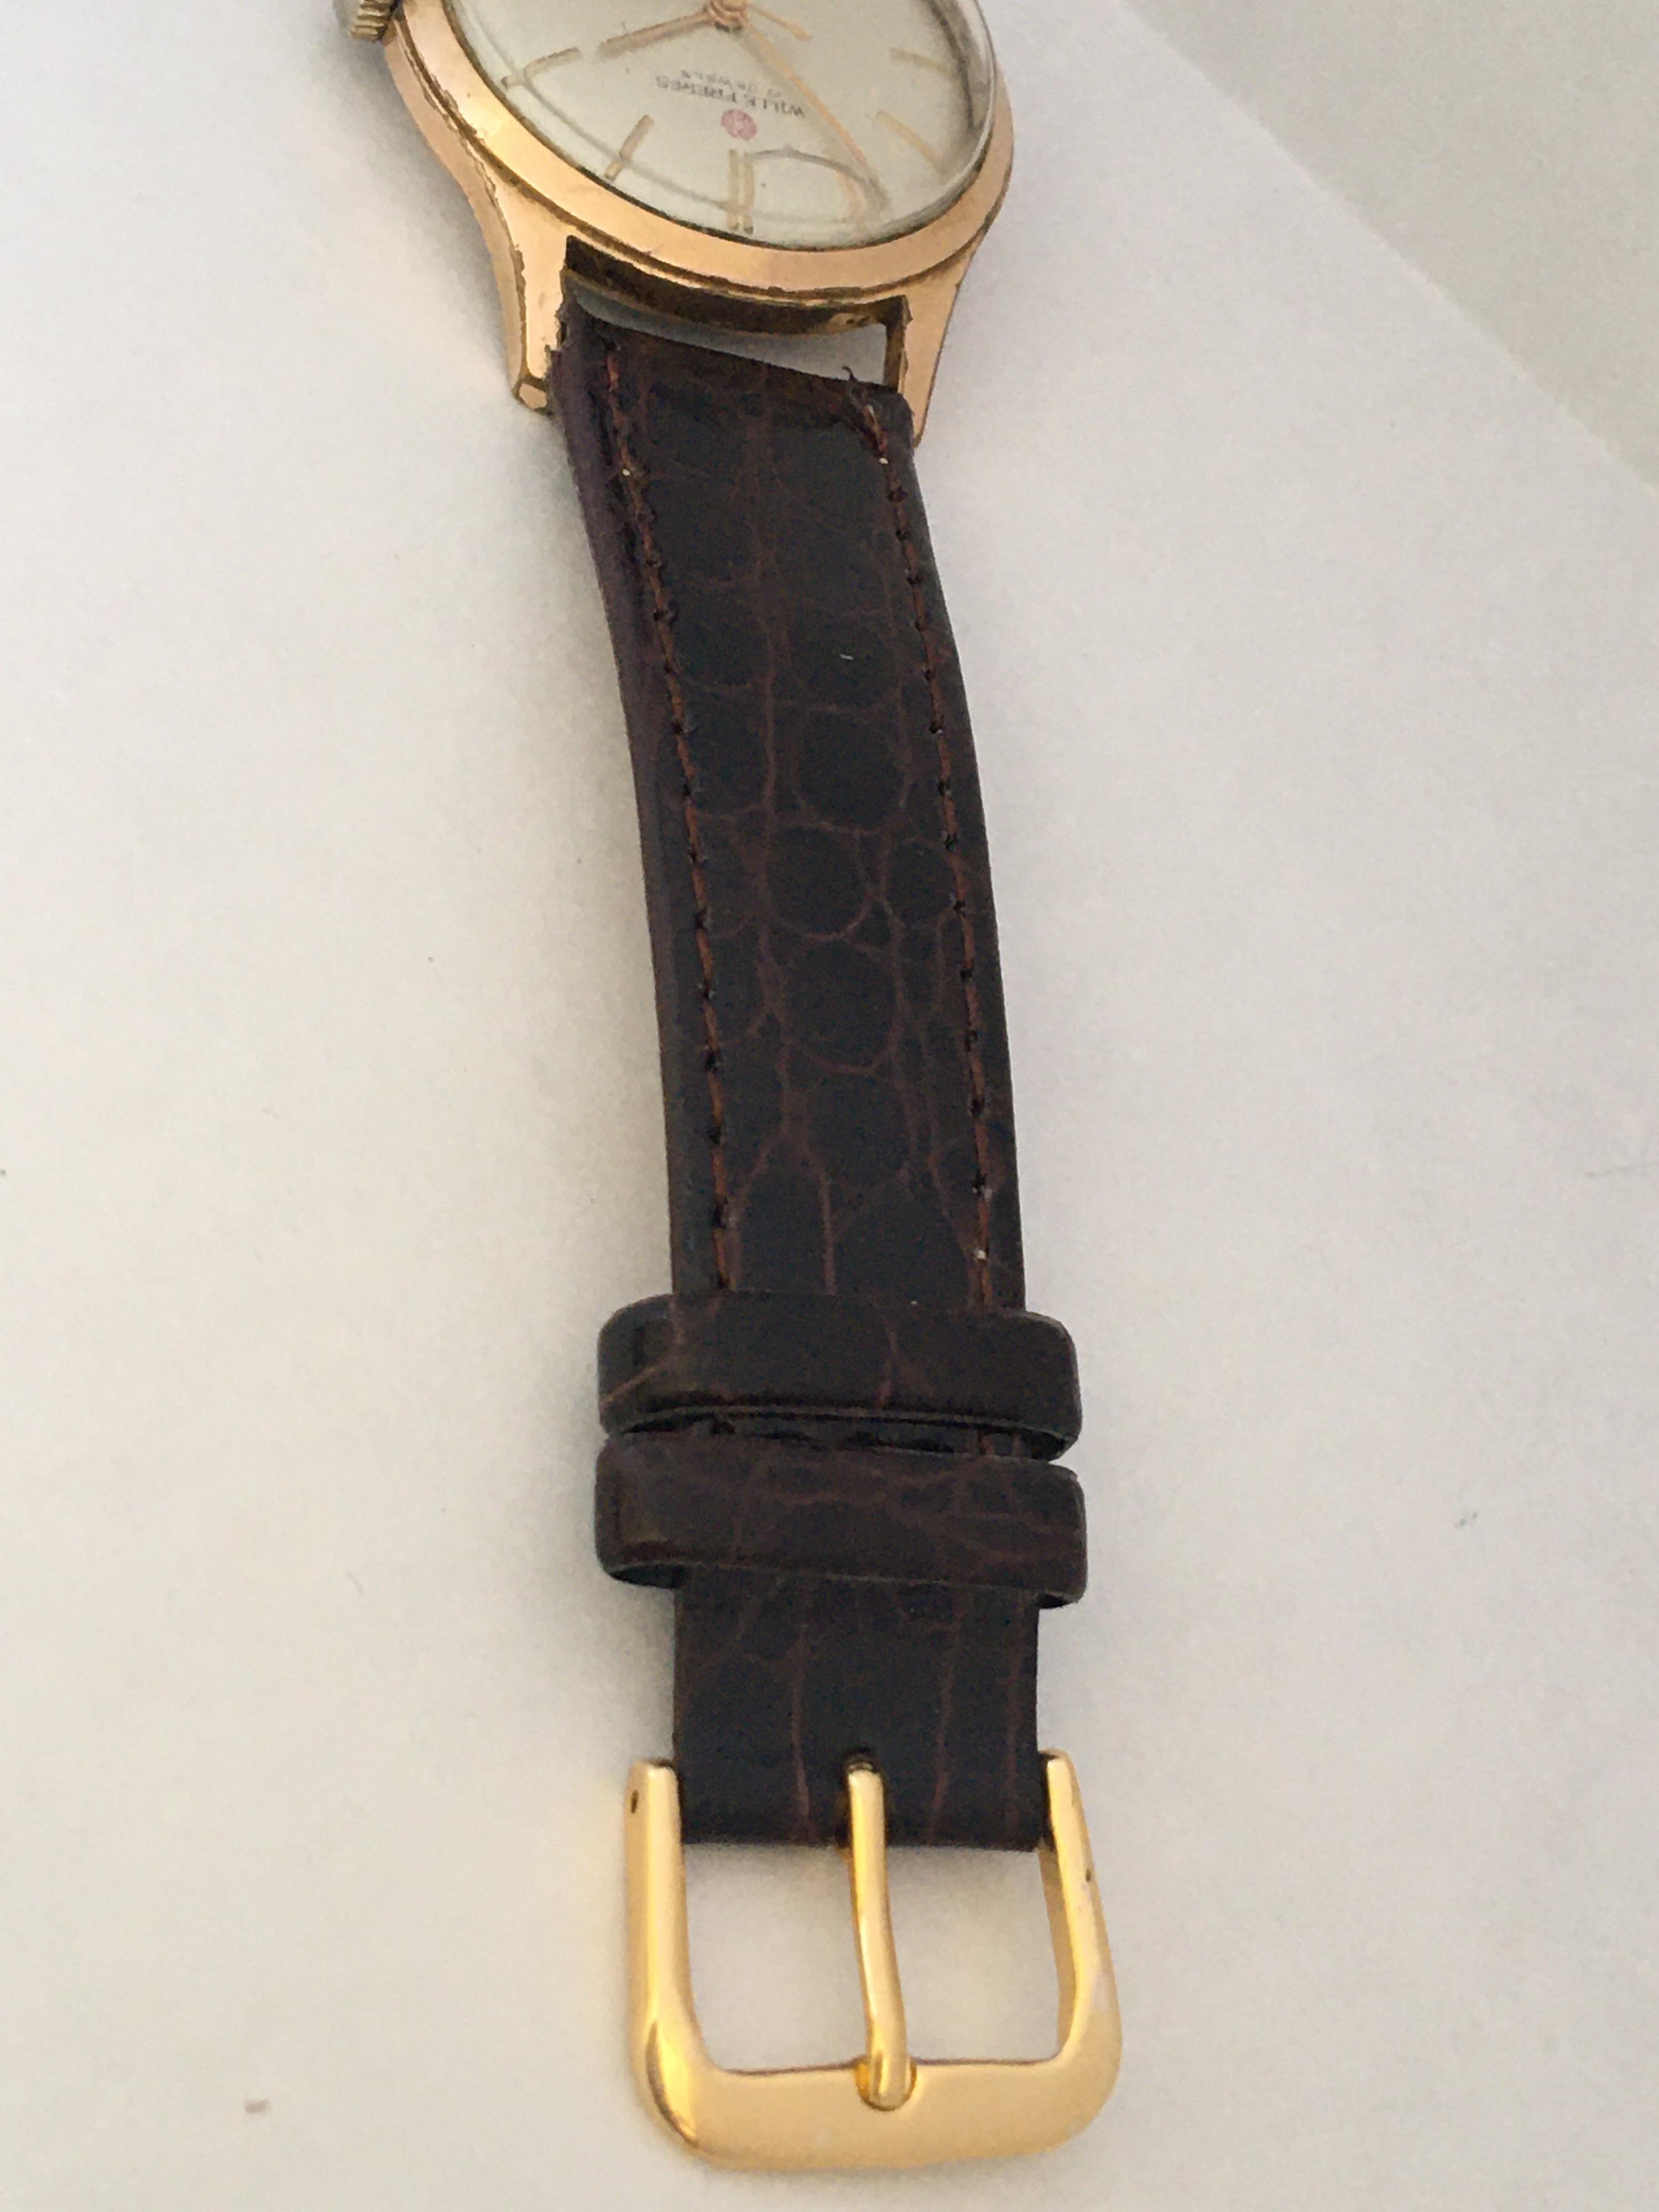 Vintage 1960s Gold-Plated Wille Freres Mechanical Watch For Sale 2